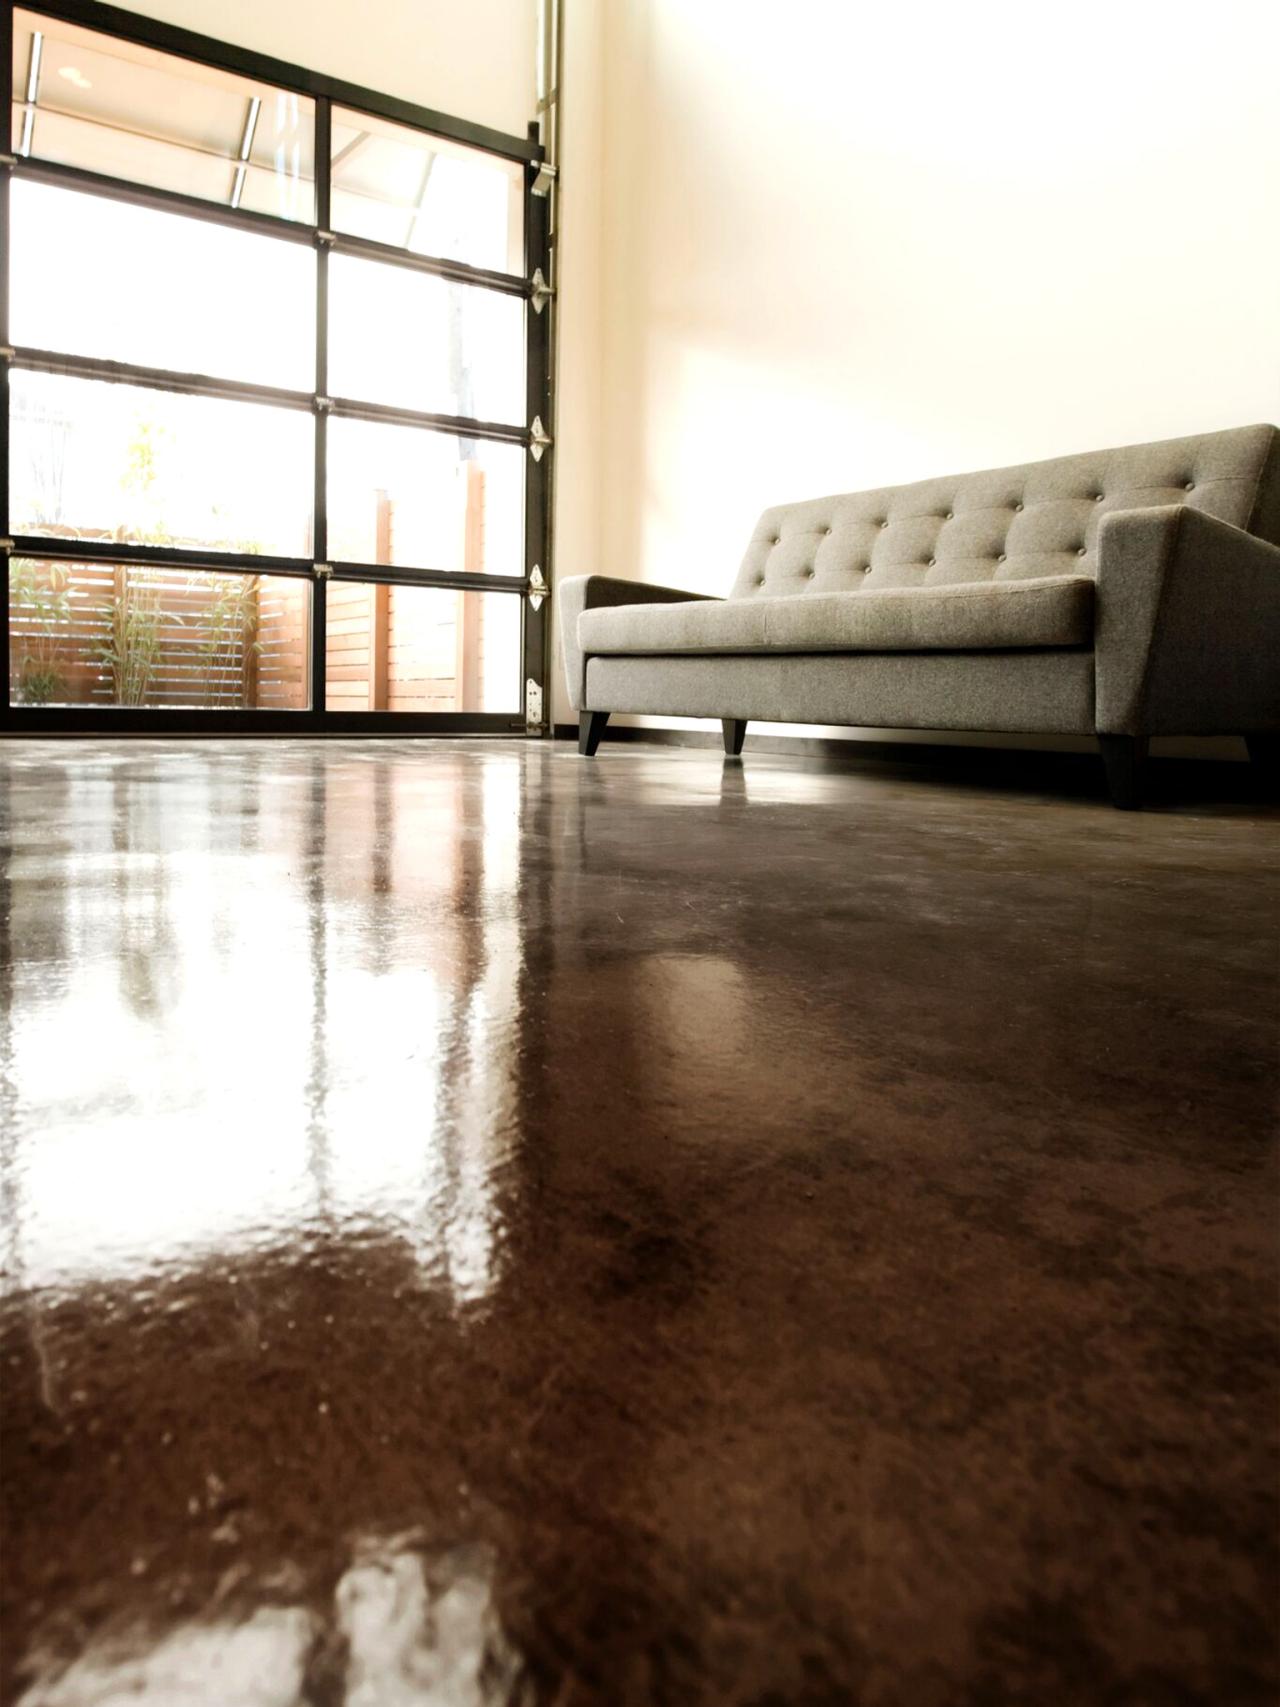 How to Apply an Acid-Stain Look to Concrete Flooring | HGTV